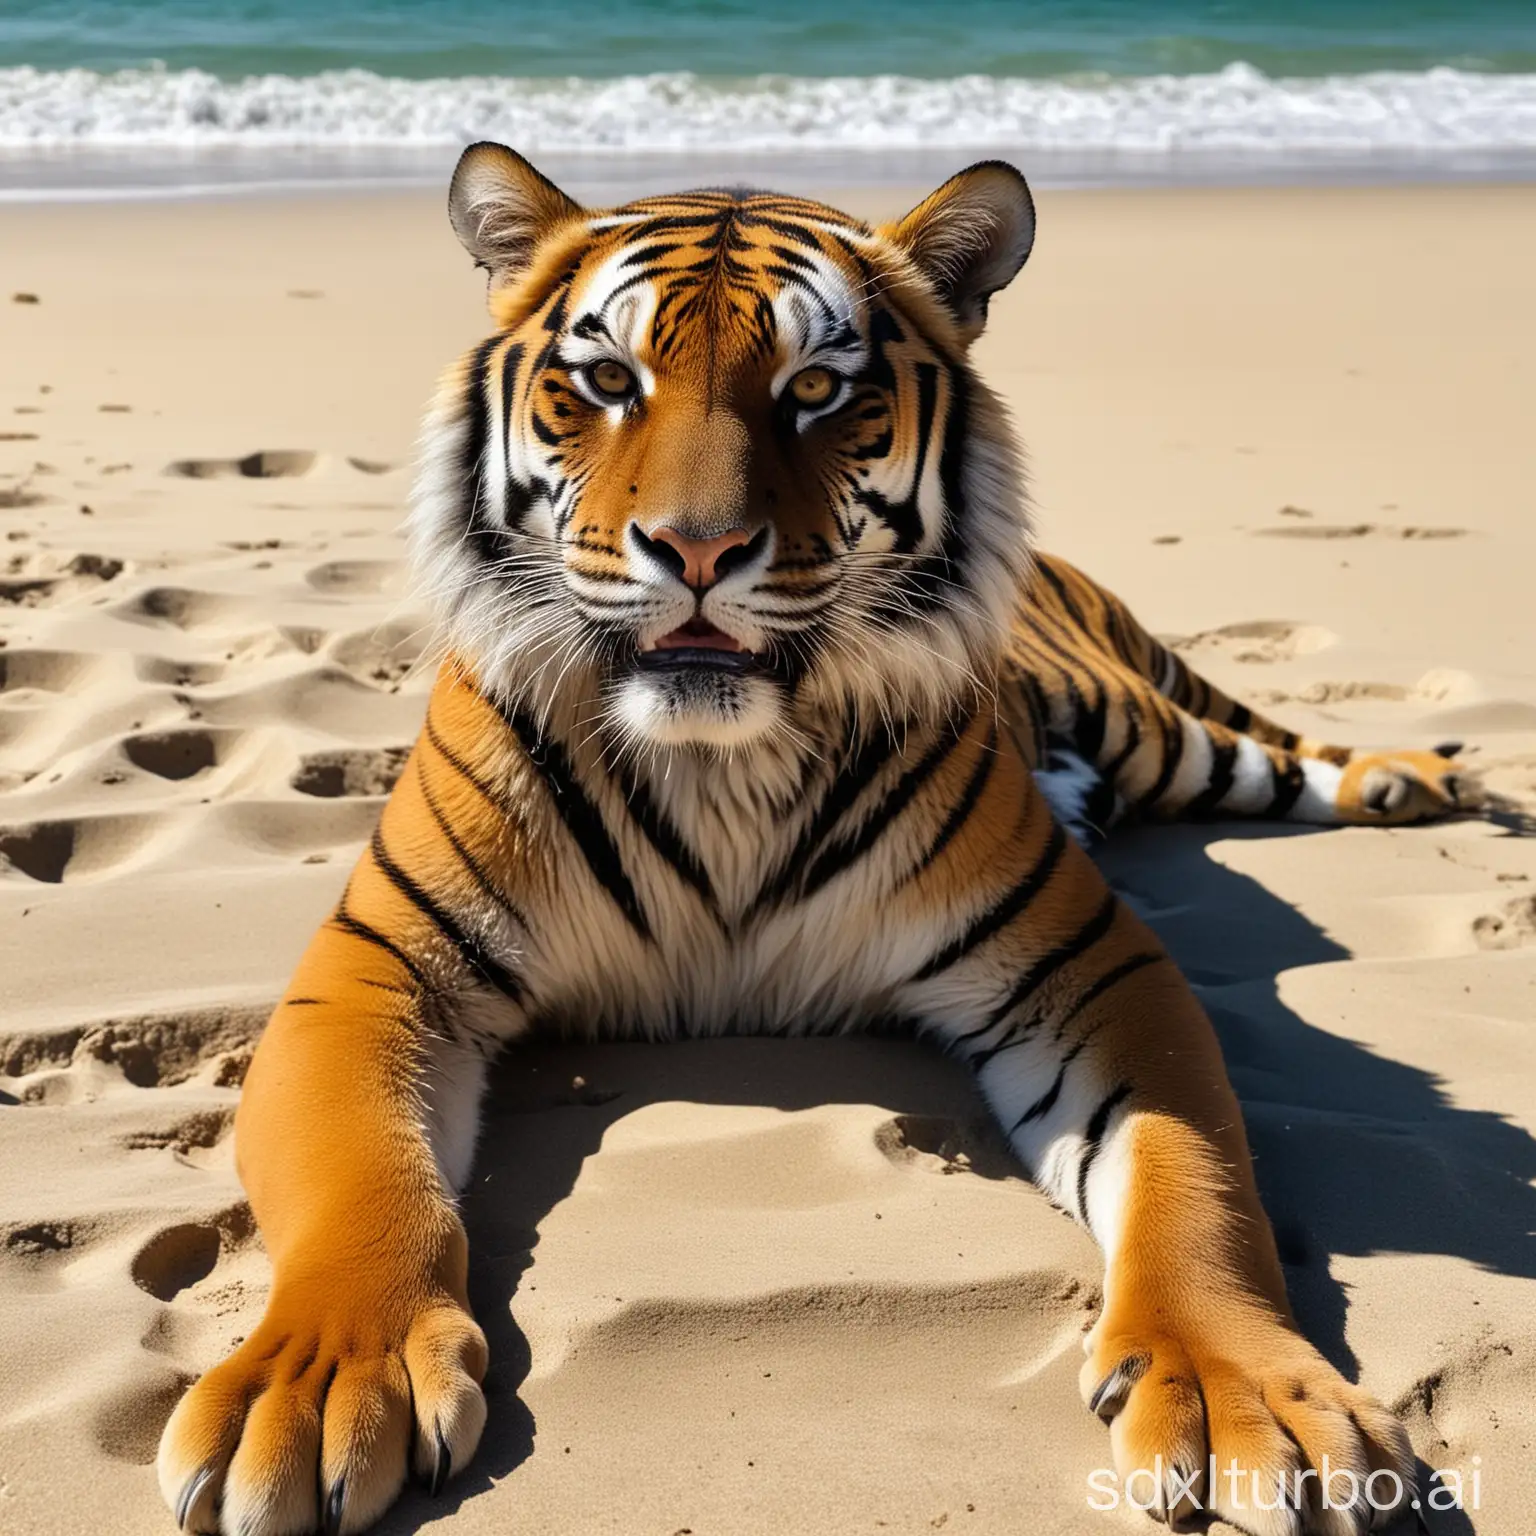 Tiger-Sunbathing-in-Beach-with-Swimsuit